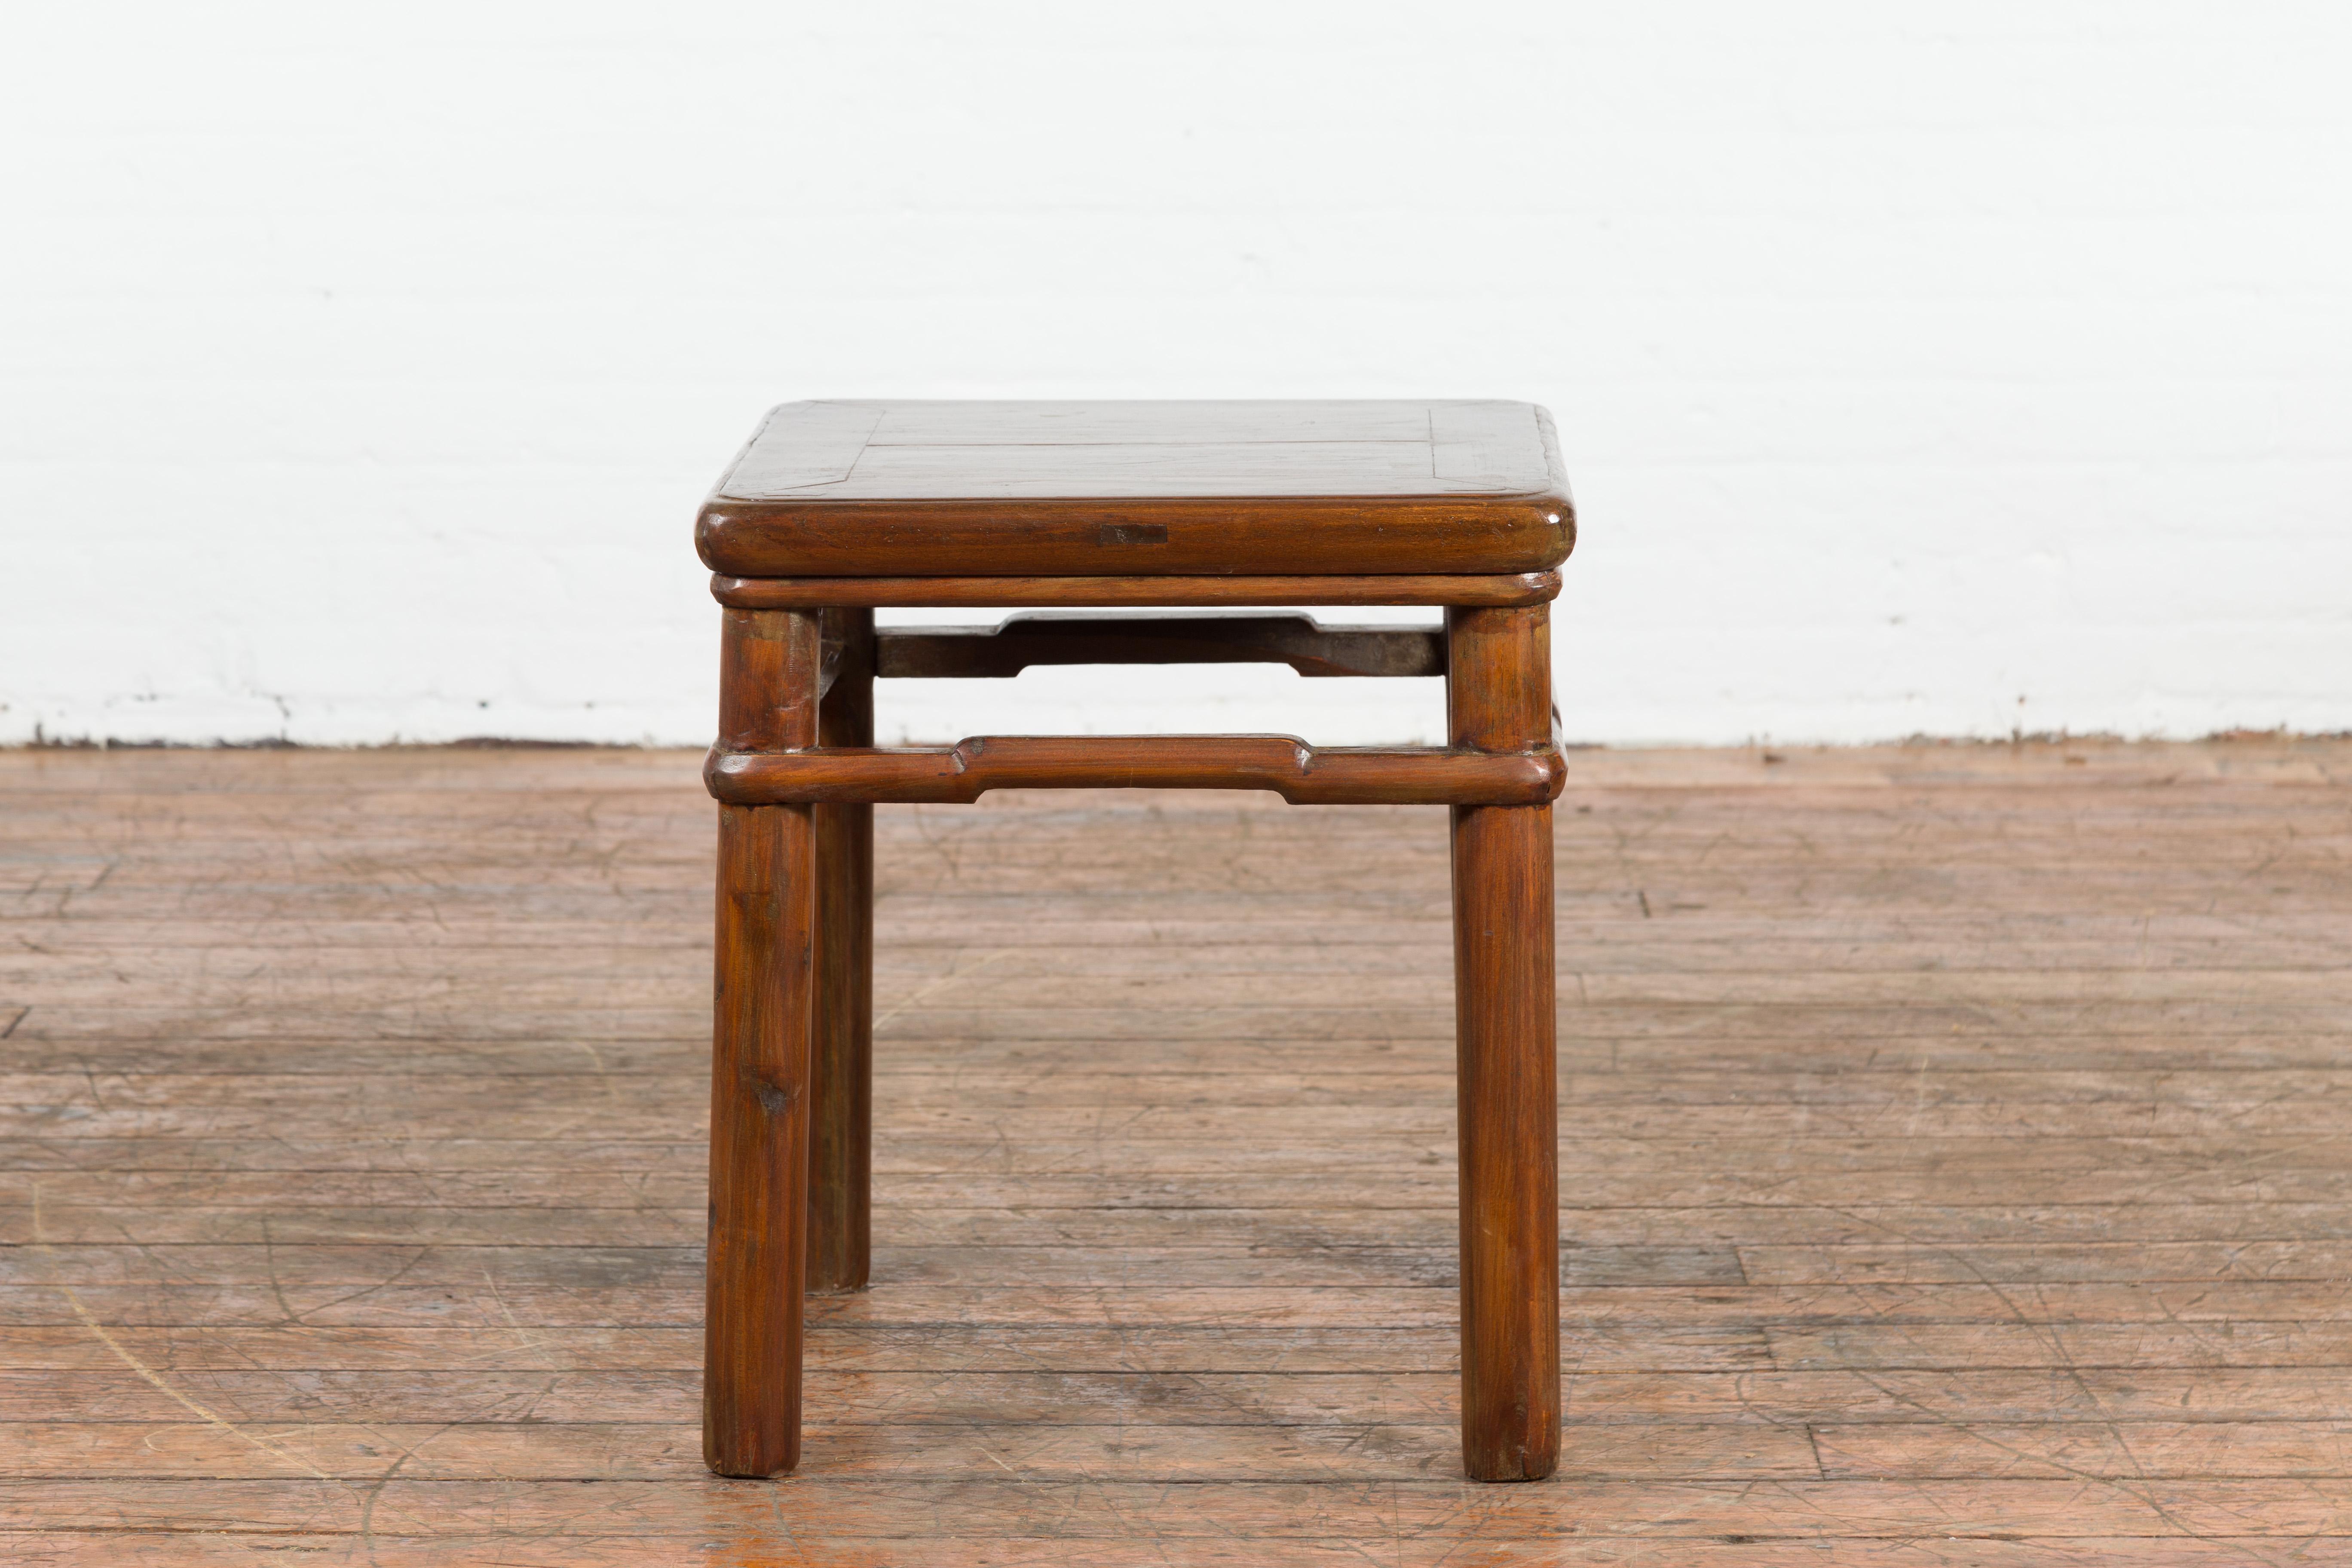 Chinese Qing Dynasty Period 19th Century Side Table with Humpback Stretchers For Sale 7